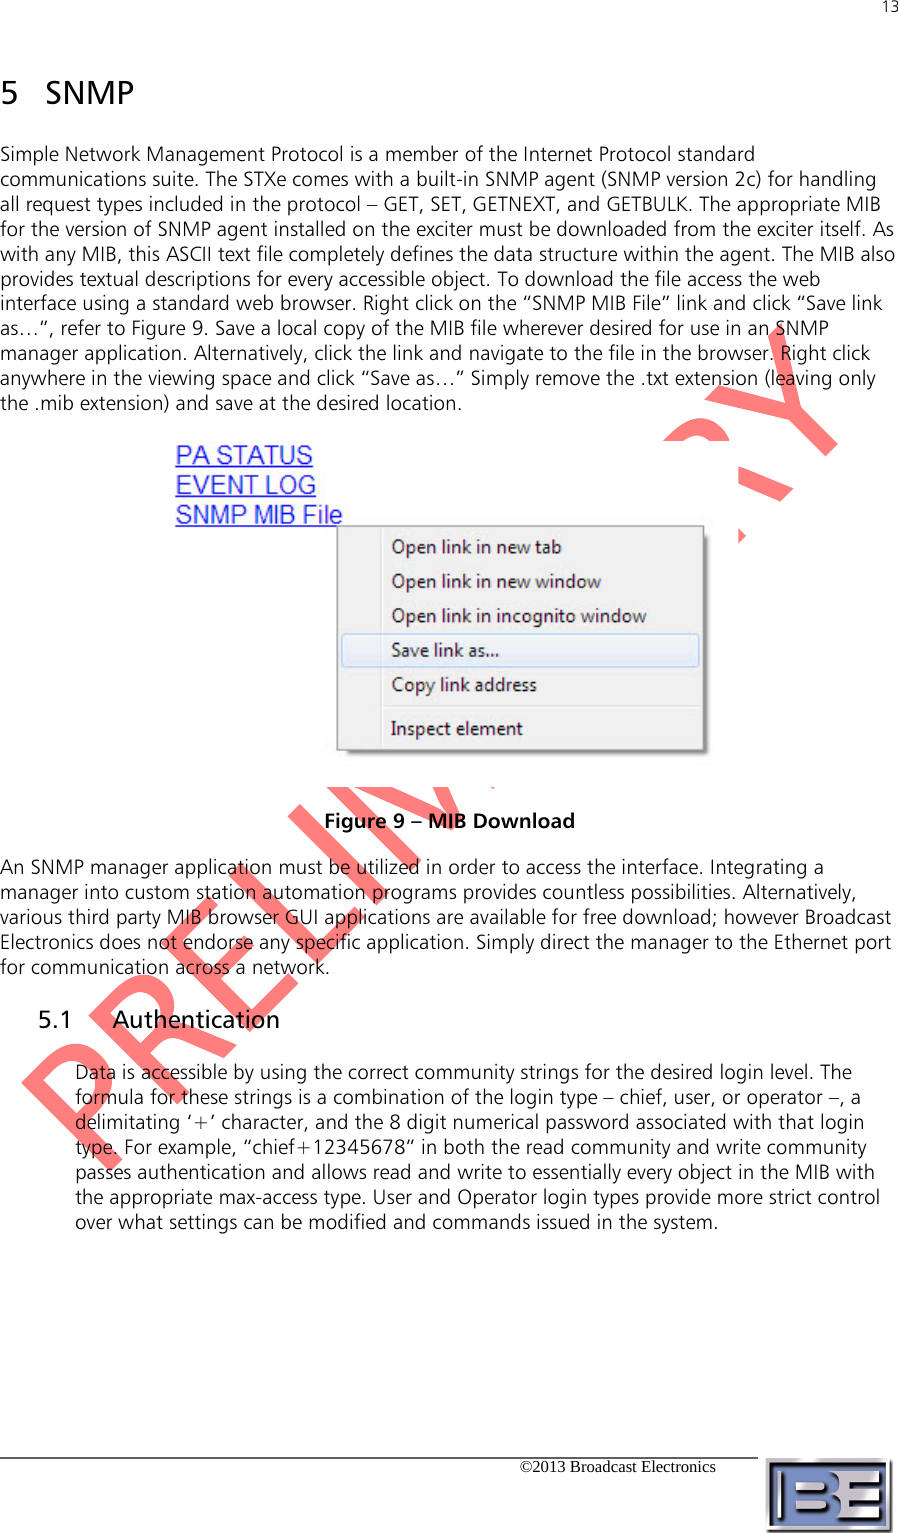 13   ©2013 Broadcast Electronics  SNMP 5Simple Network Management Protocol is a member of the Internet Protocol standard communications suite. The STXe comes with a built-in SNMP agent (SNMP version 2c) for handling all request types included in the protocol – GET, SET, GETNEXT, and GETBULK. The appropriate MIB for the version of SNMP agent installed on the exciter must be downloaded from the exciter itself. As with any MIB, this ASCII text file completely defines the data structure within the agent. The MIB also provides textual descriptions for every accessible object. To download the file access the web interface using a standard web browser. Right click on the “SNMP MIB File” link and click “Save link as…”, refer to Figure 9. Save a local copy of the MIB file wherever desired for use in an SNMP manager application. Alternatively, click the link and navigate to the file in the browser. Right click anywhere in the viewing space and click “Save as…” Simply remove the .txt extension (leaving only the .mib extension) and save at the desired location.  Figure 9 – MIB Download An SNMP manager application must be utilized in order to access the interface. Integrating a manager into custom station automation programs provides countless possibilities. Alternatively, various third party MIB browser GUI applications are available for free download; however Broadcast Electronics does not endorse any specific application. Simply direct the manager to the Ethernet port for communication across a network. 5.1 Authentication Data is accessible by using the correct community strings for the desired login level. The formula for these strings is a combination of the login type – chief, user, or operator –, a delimitating ‘+’ character, and the 8 digit numerical password associated with that login type. For example, “chief+12345678” in both the read community and write community passes authentication and allows read and write to essentially every object in the MIB with the appropriate max-access type. User and Operator login types provide more strict control over what settings can be modified and commands issued in the system. 